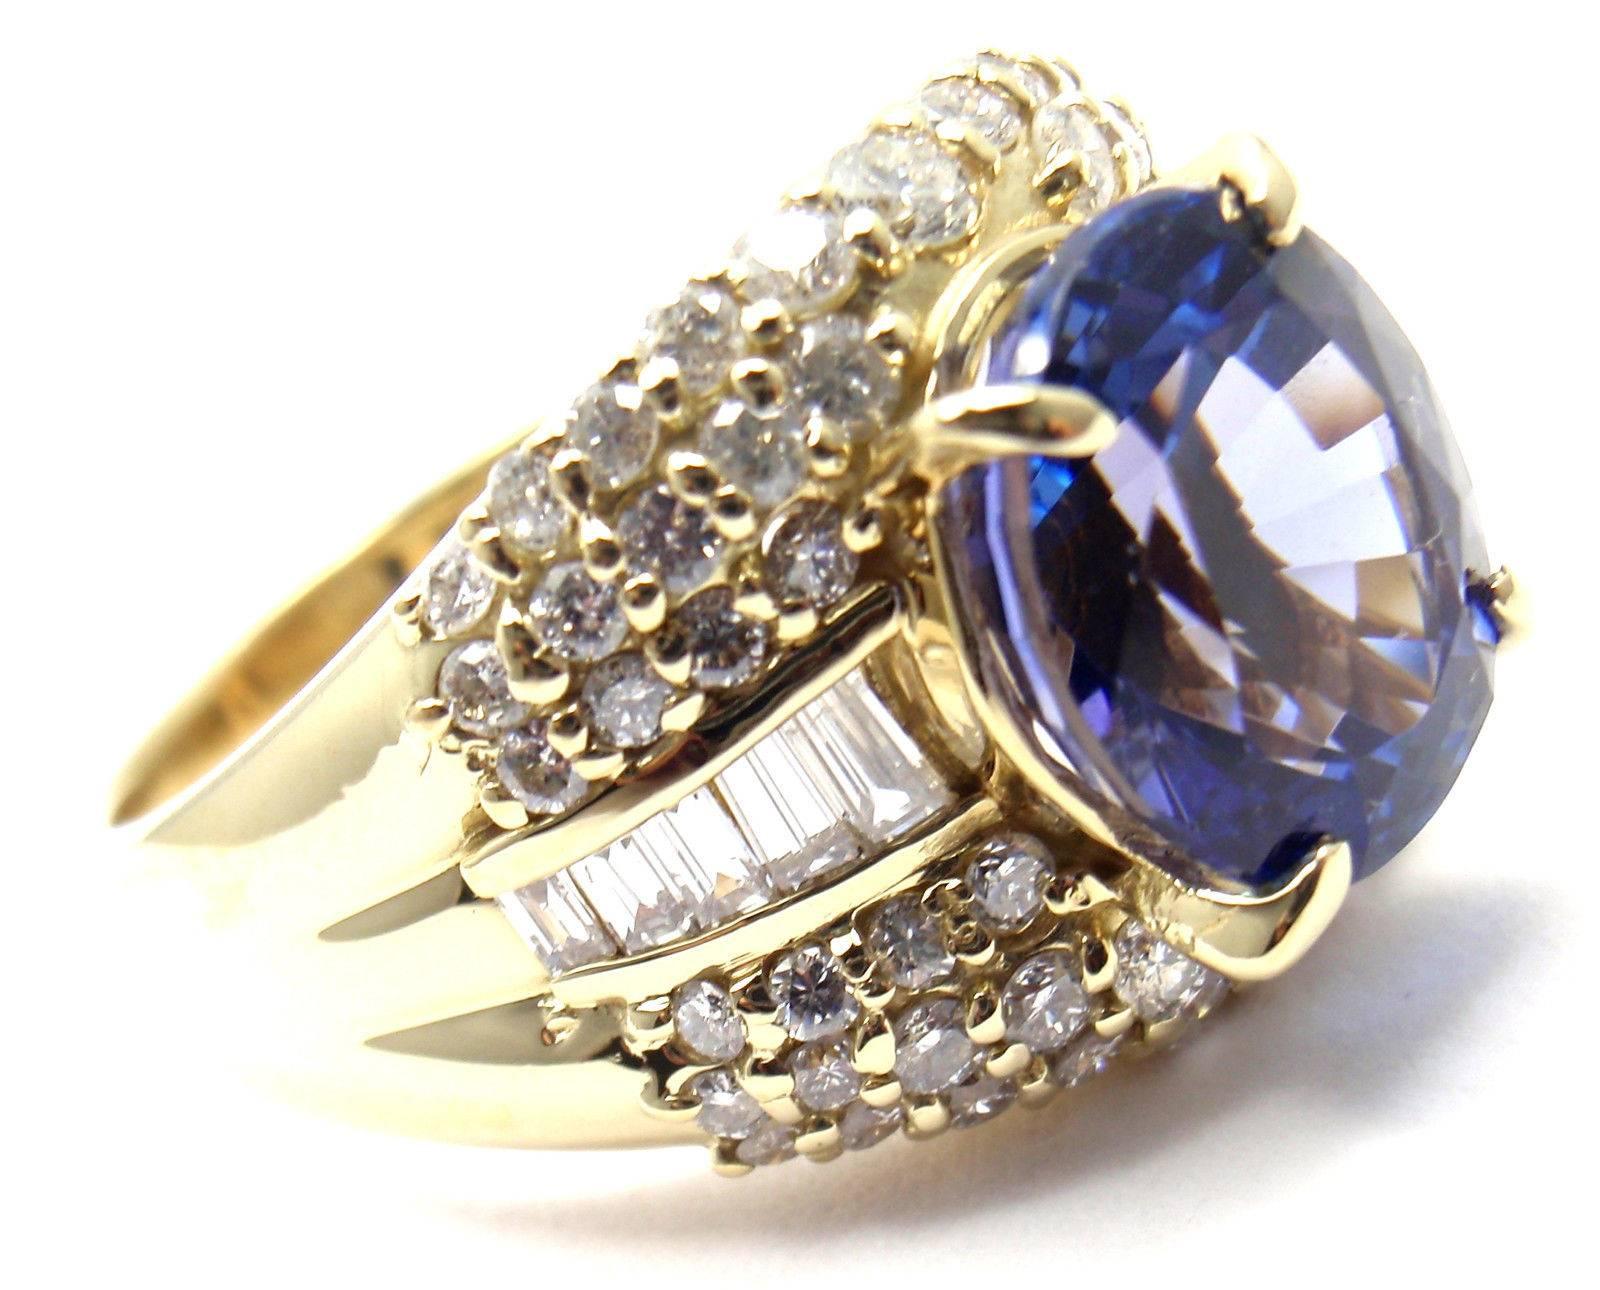 Gorgeous! Estate Yellow Gold Large 3.87ct Tanzanite And Diamond Cocktail Ring.
With 1 oval tanzanite 3.87ct
Diamonds SI1 clarity, G color total weight approx. 1.11ct

Details: 
Weight: 9.1 grams
Size: 6.5
Width: 14mm
Stamped Hallmarks: 18k